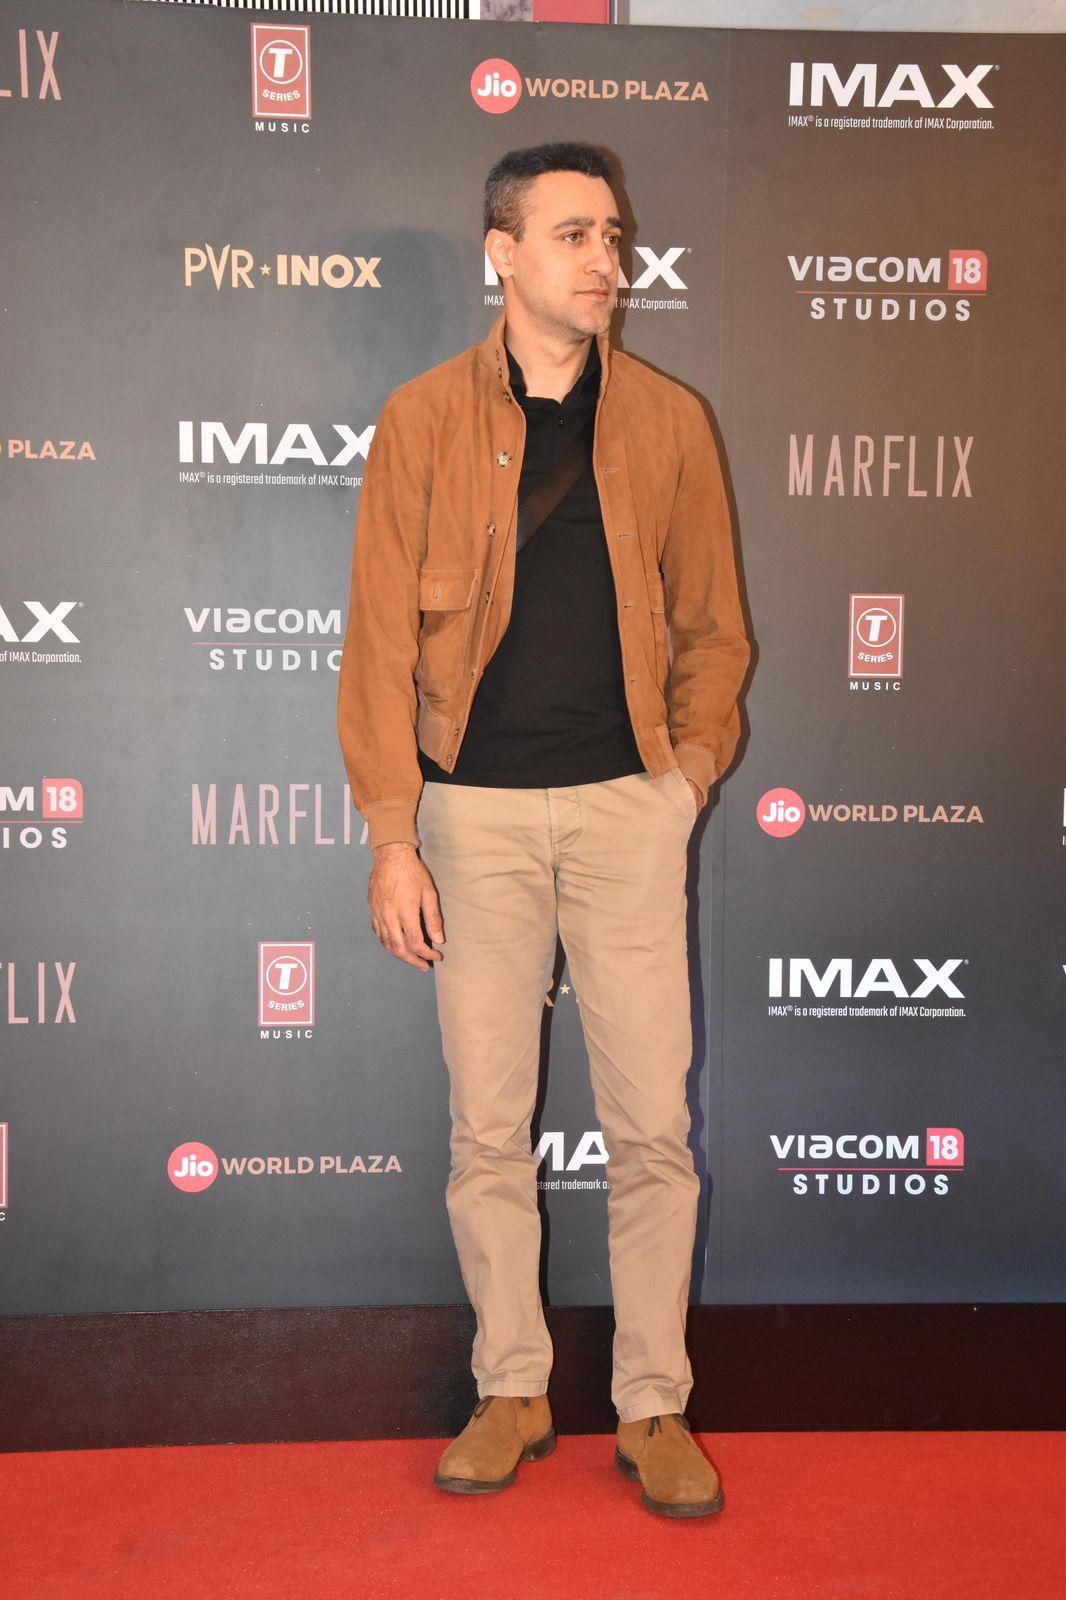 Imran Khan also joined the movie premier looking as handsome as ever